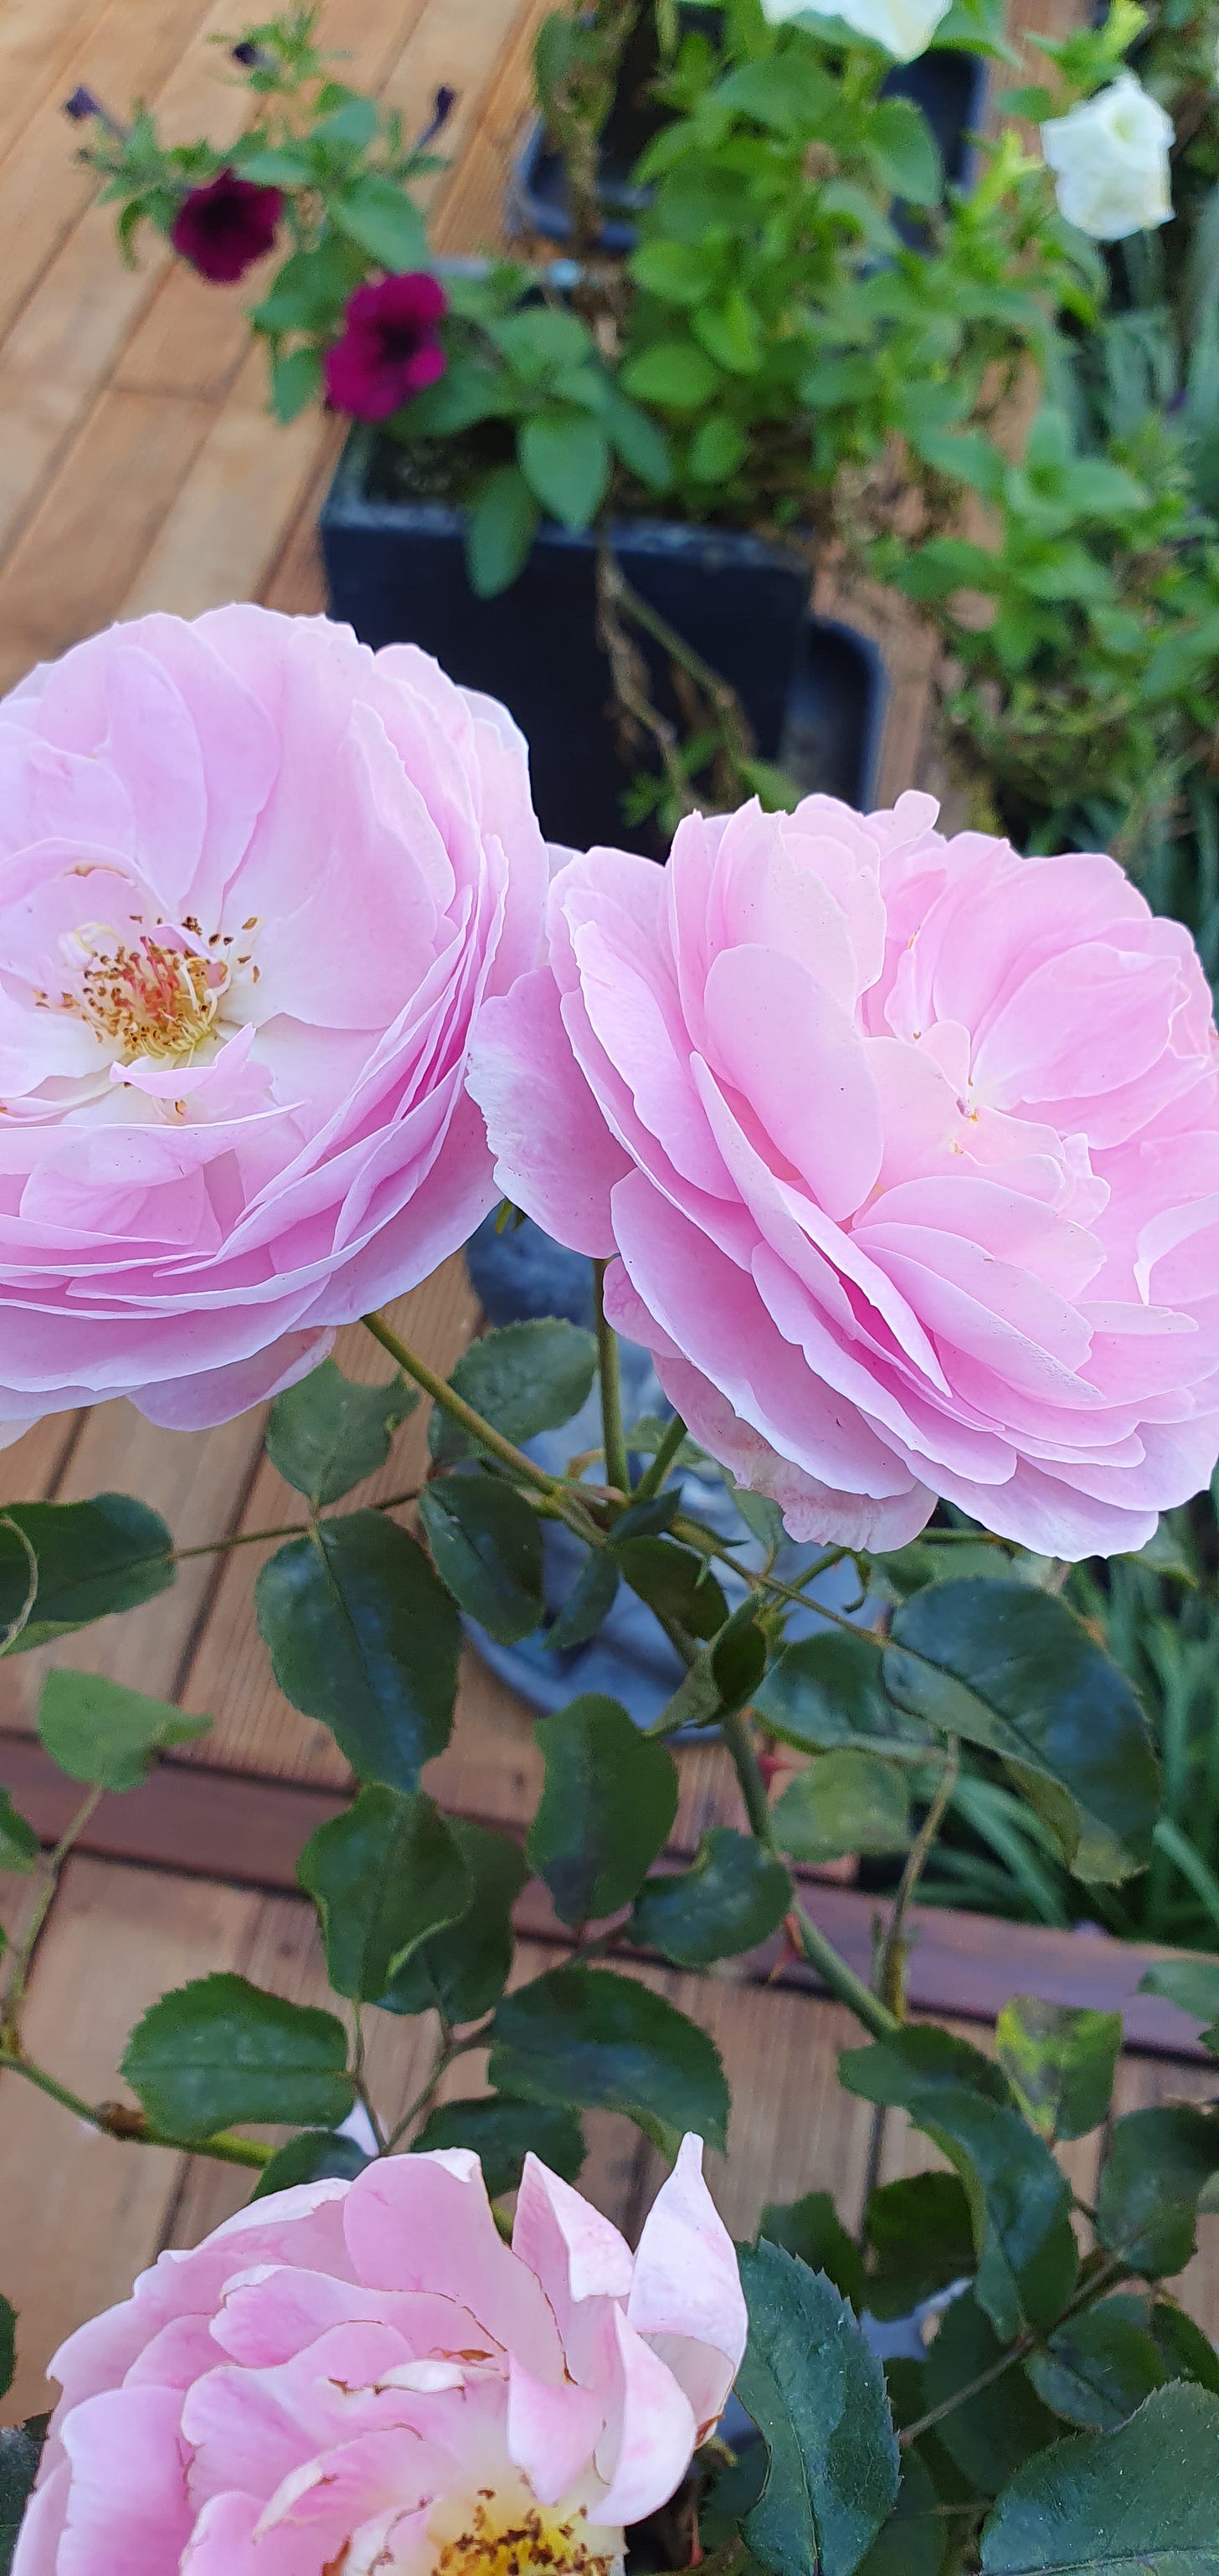 Roses on the deck. Beautiful pink roses in pots.